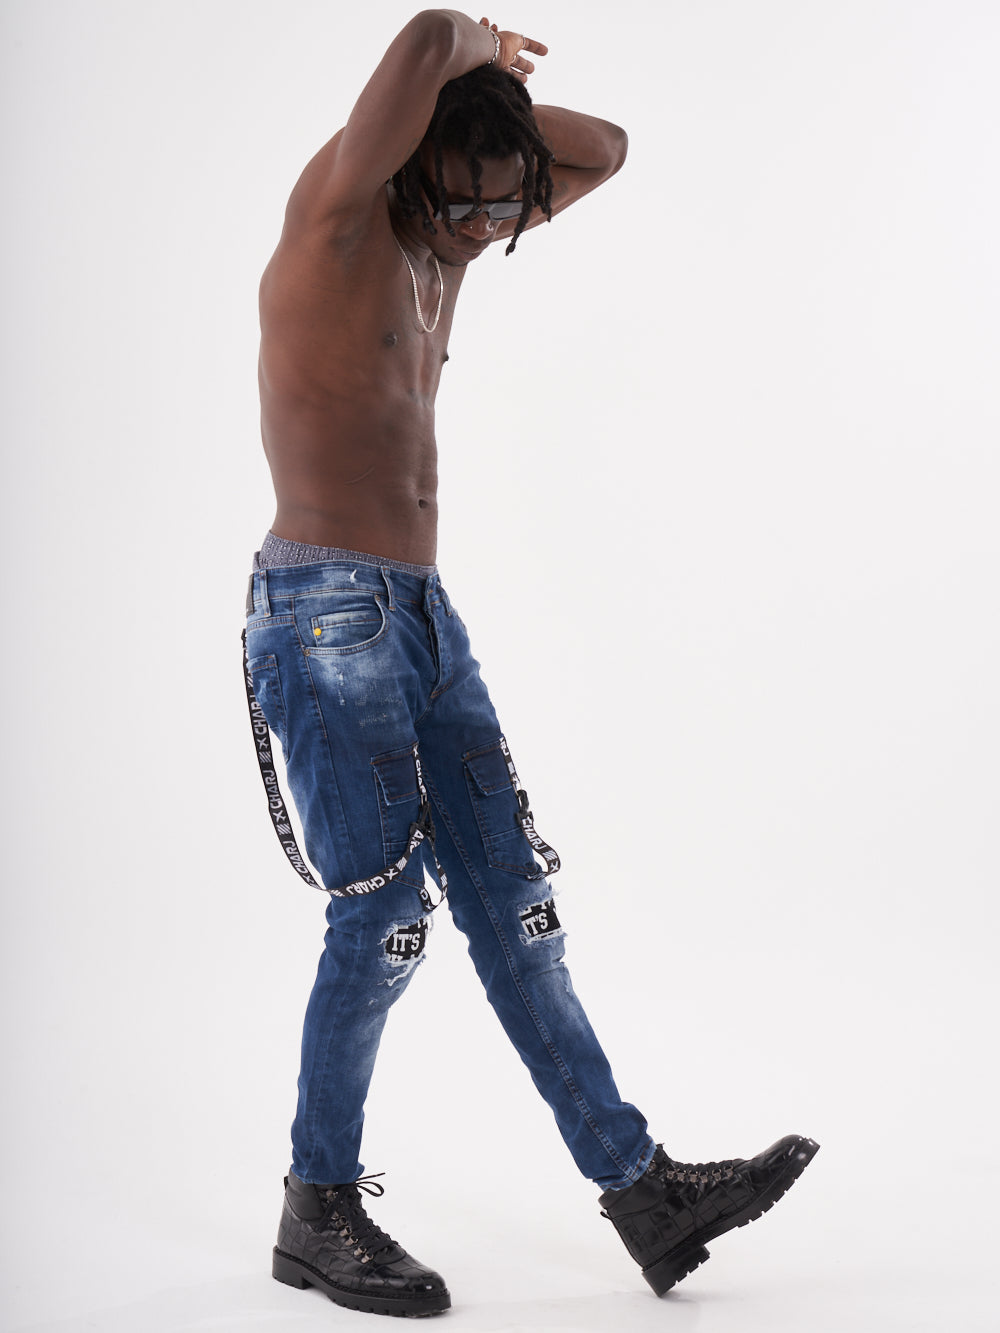 A man in TORNADO BLUE jeans posing in front of a white background.